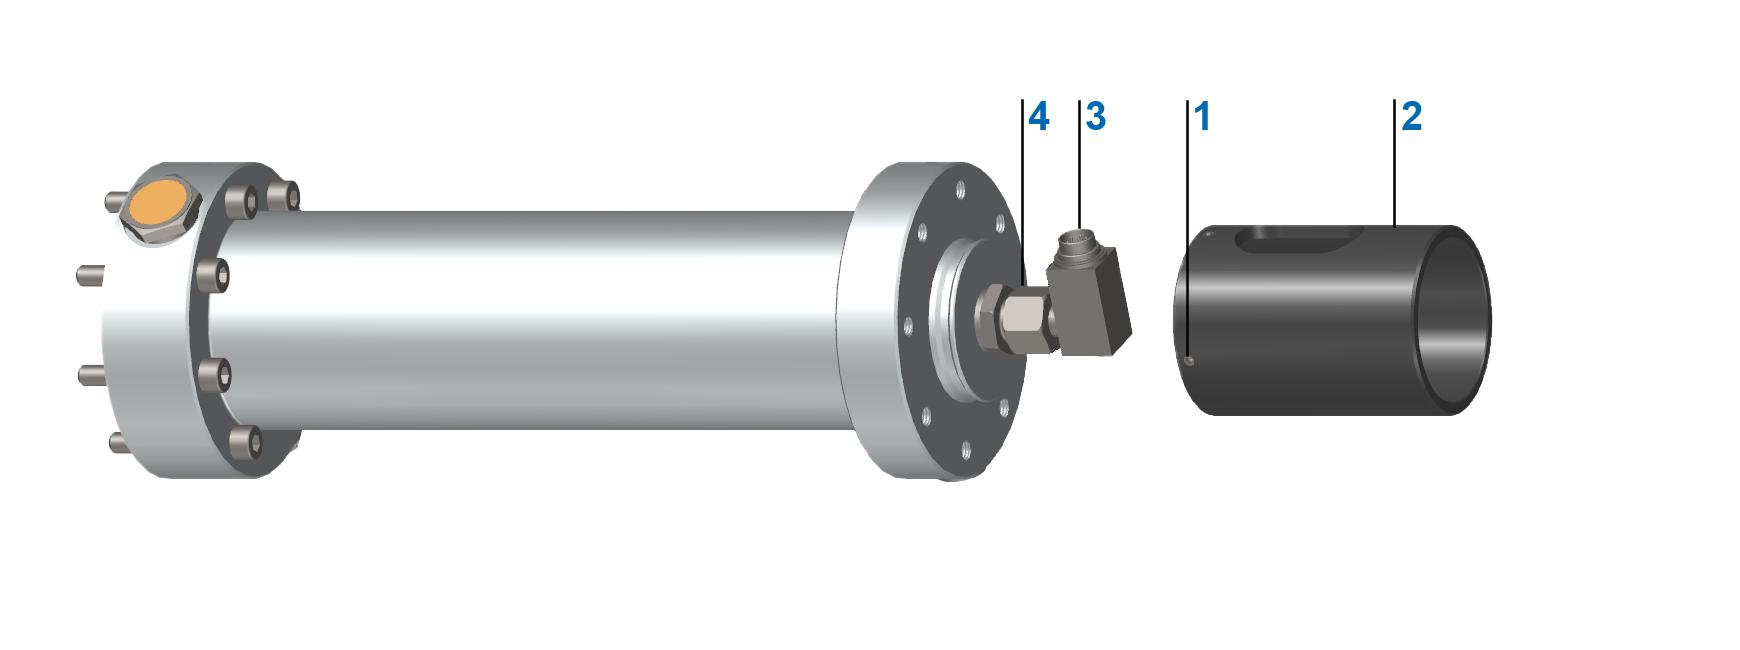 Tubus mounting for inductive position transducer - open protection tube